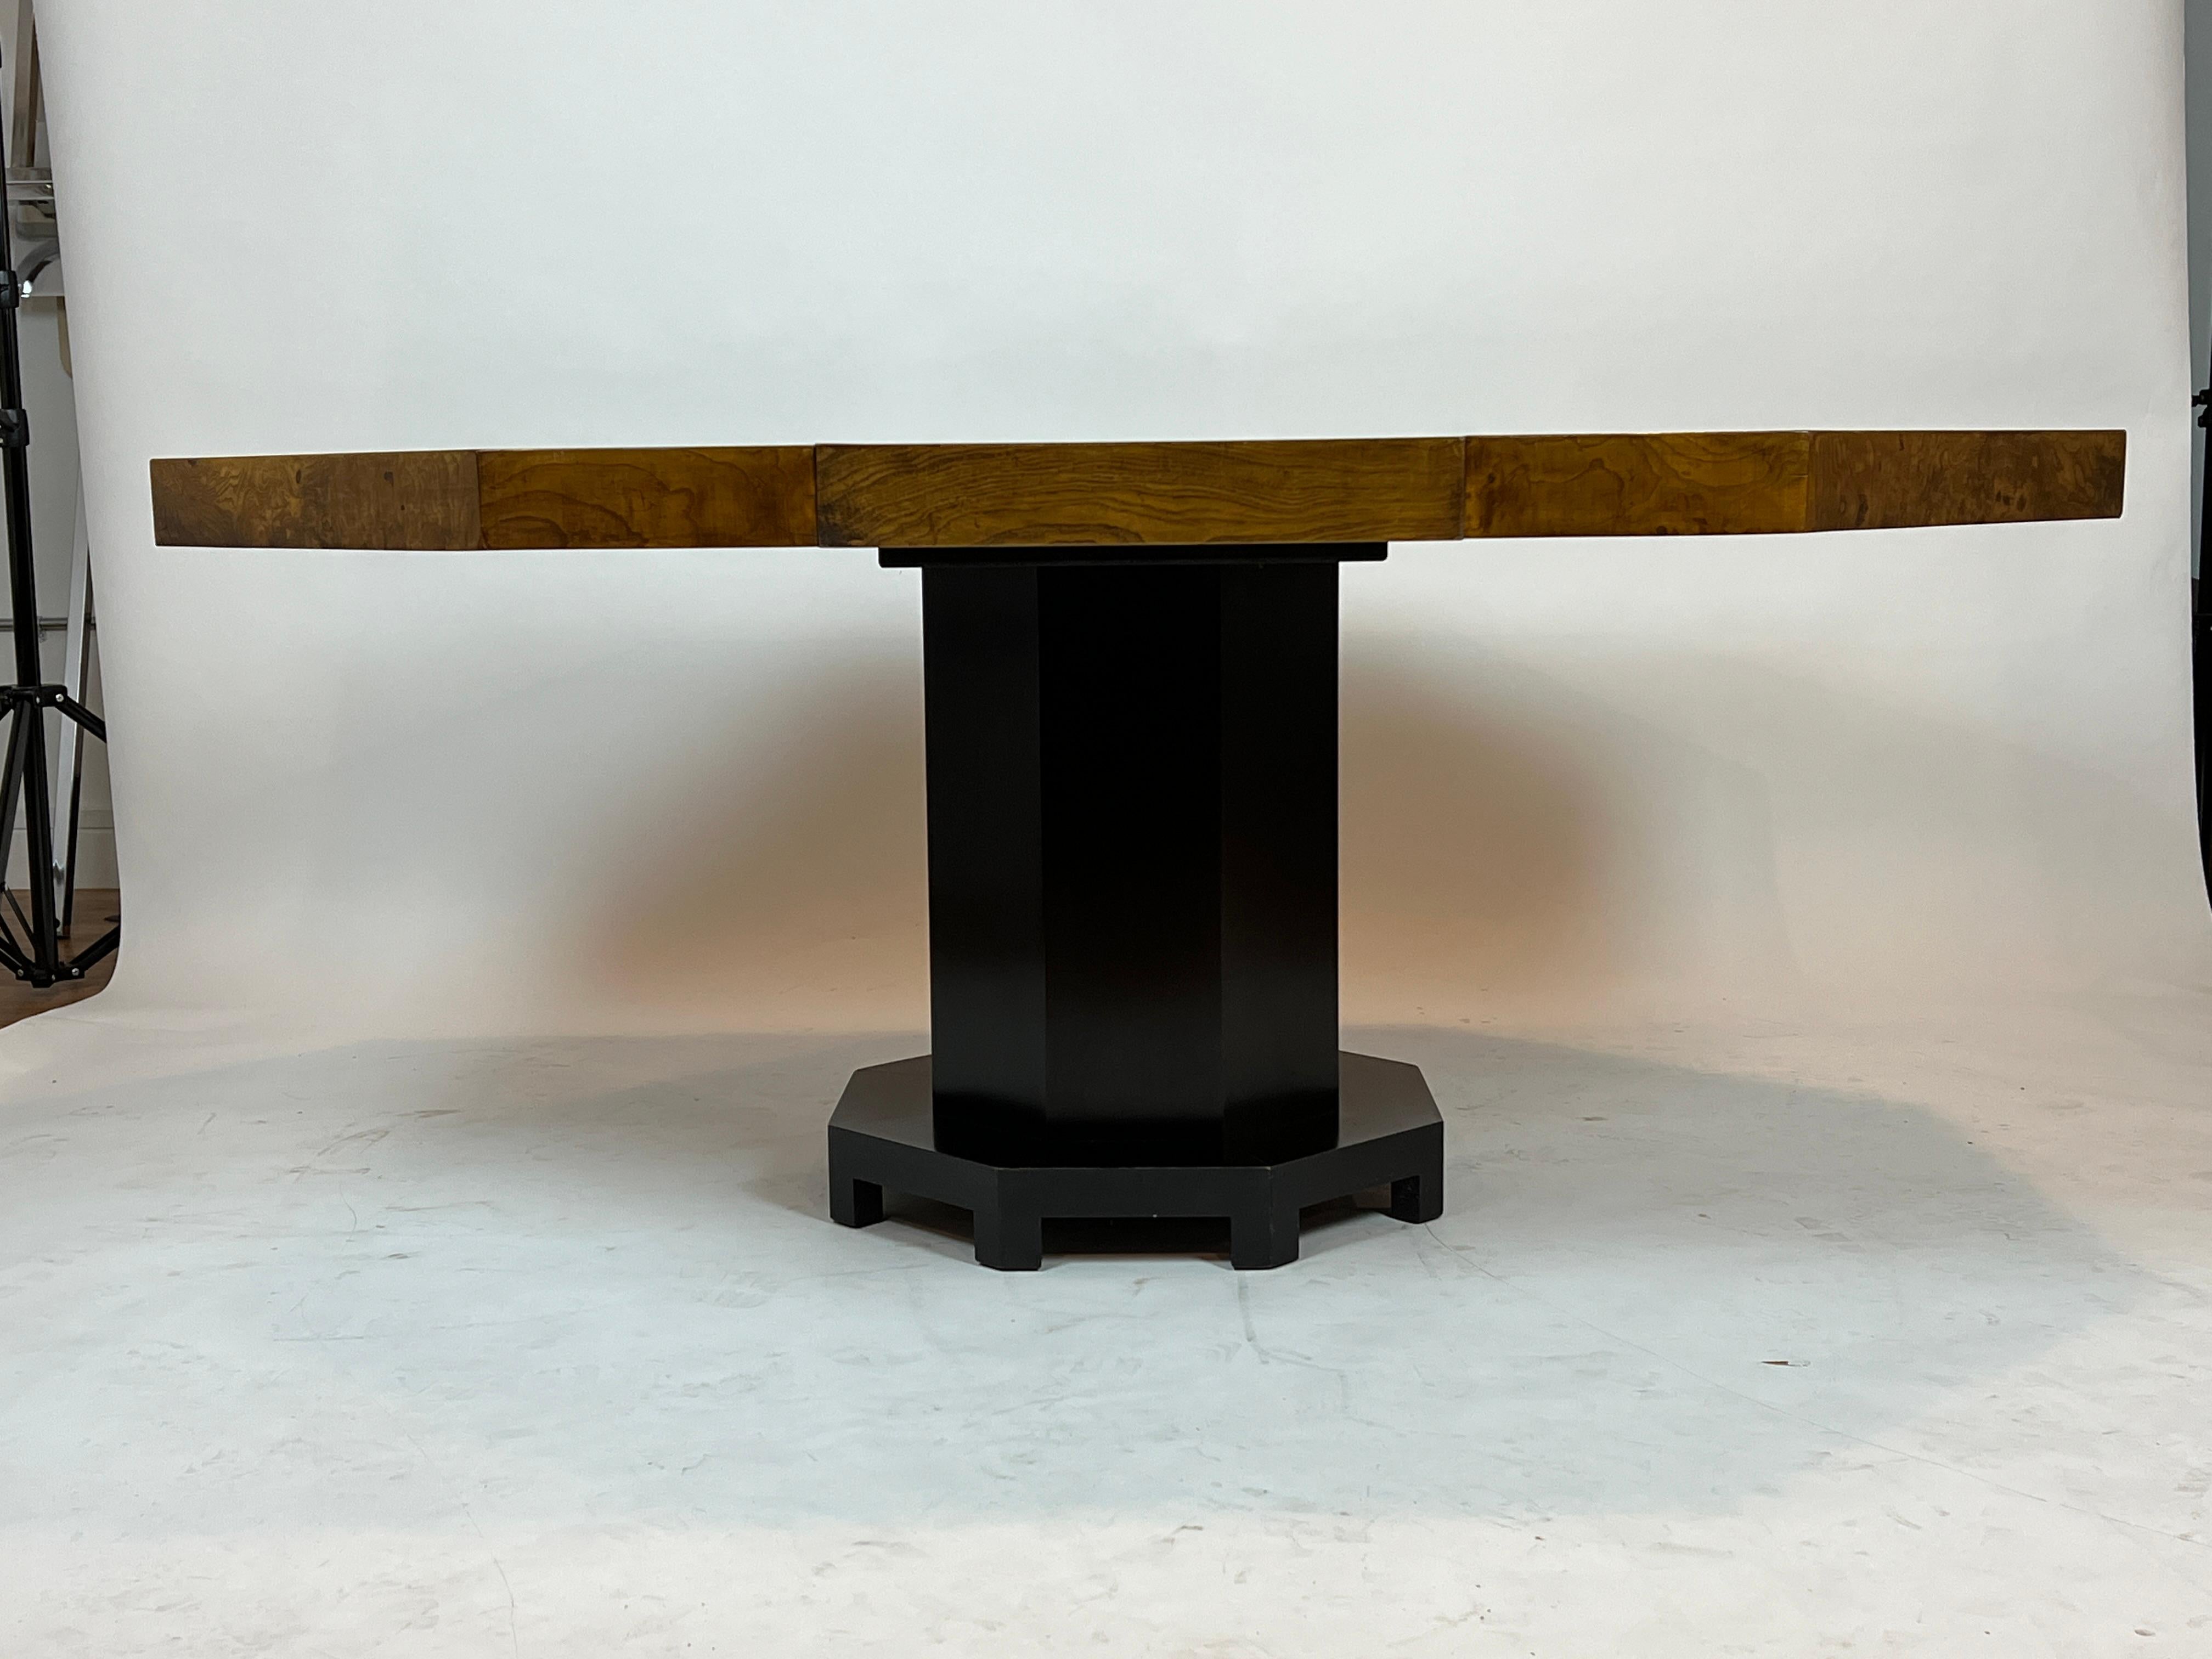 Octagon shape mid-century burl wood expandable dining or game table attributed to Harvey Probber. This sturdy and well made table opens up to extend up to 64